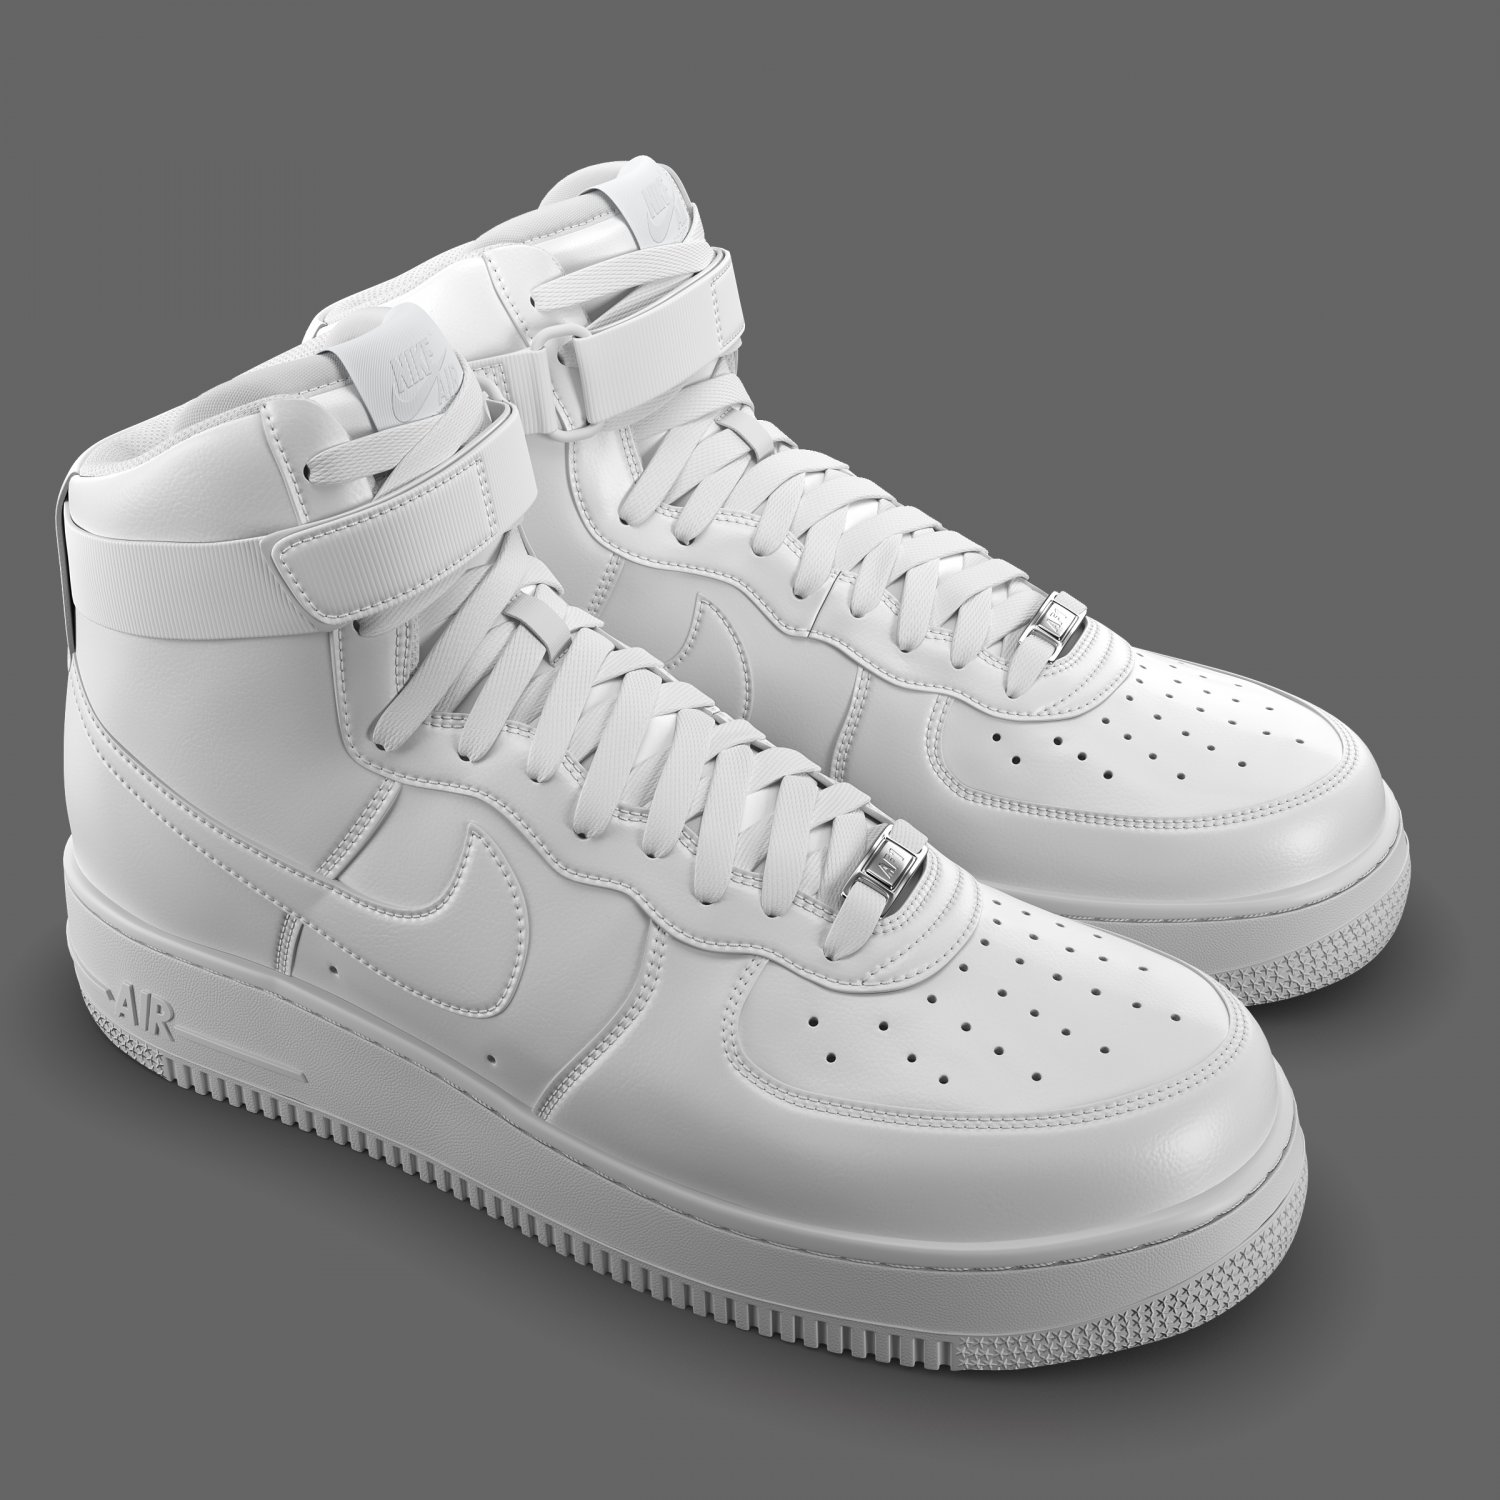 Nike Air Force 1 High PBR 3D Model in Clothing 3DExport